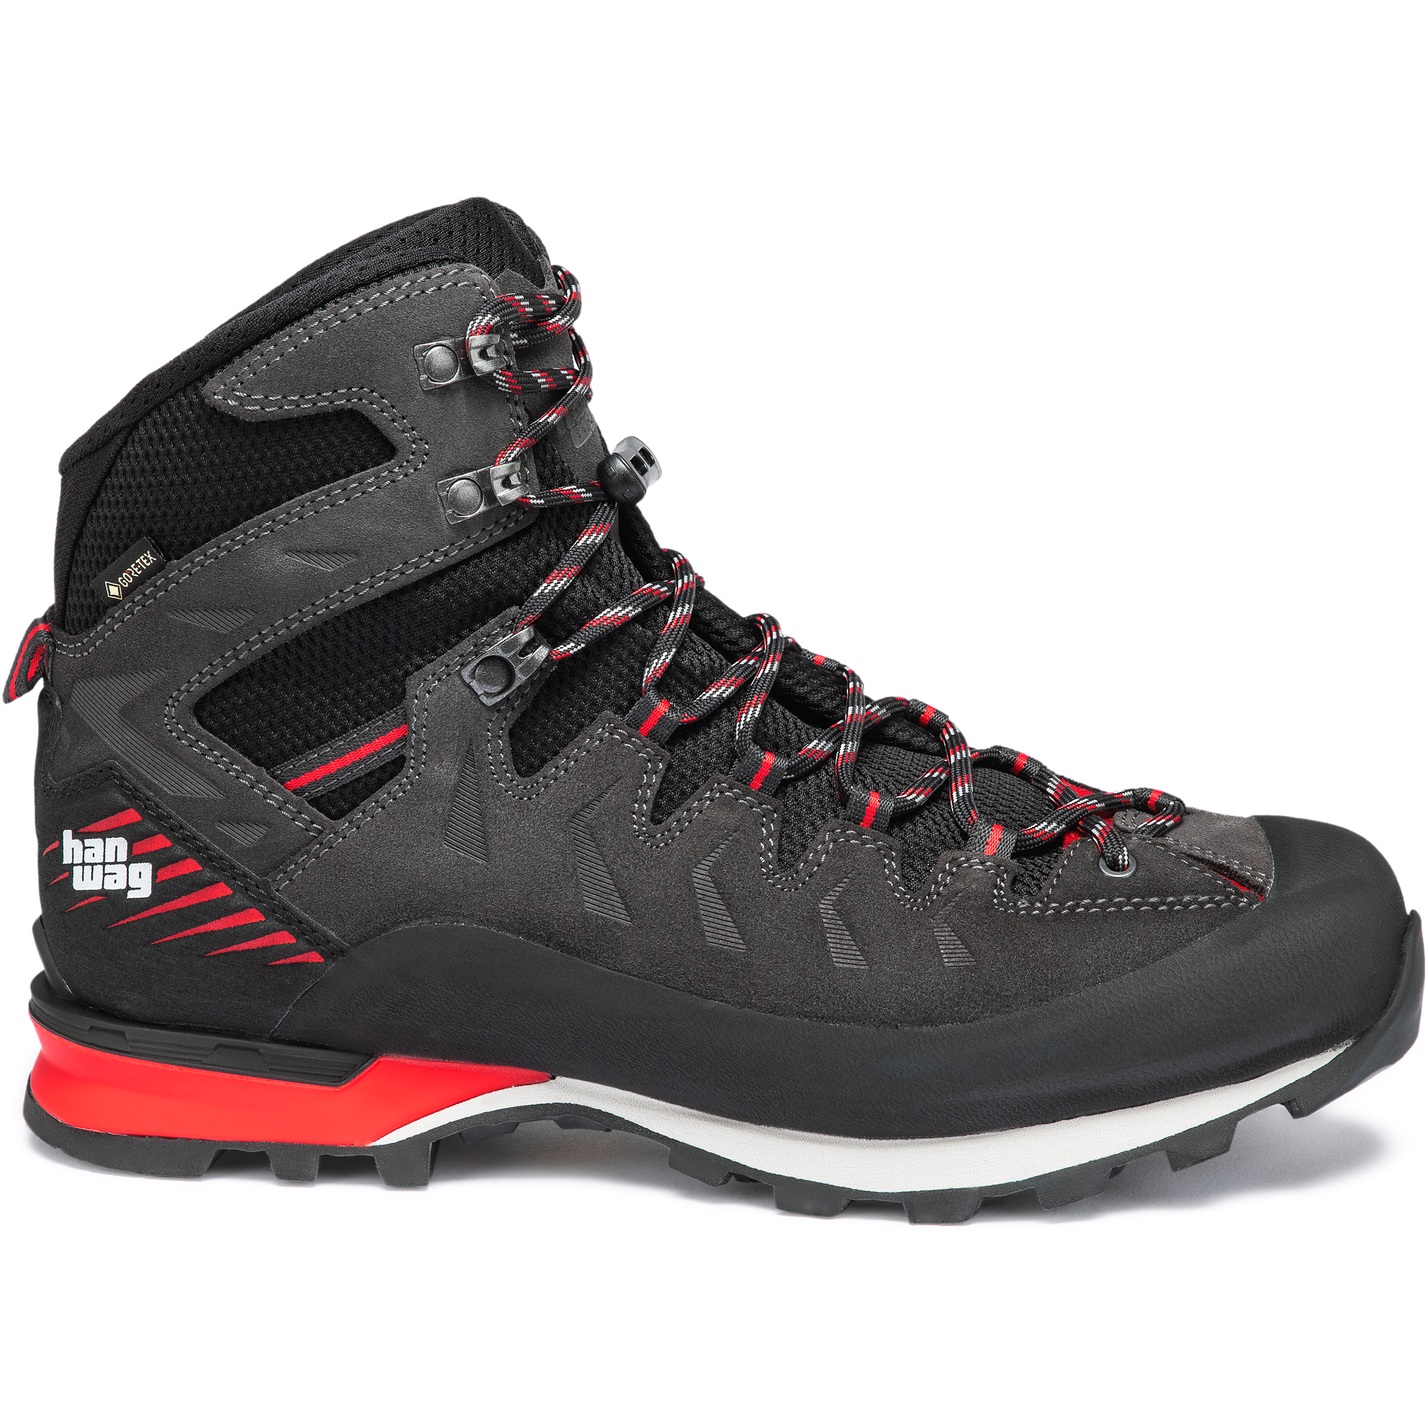 Picture of Hanwag Makra Pro GTX Mountaineering Boots Men - Asphalt/Red